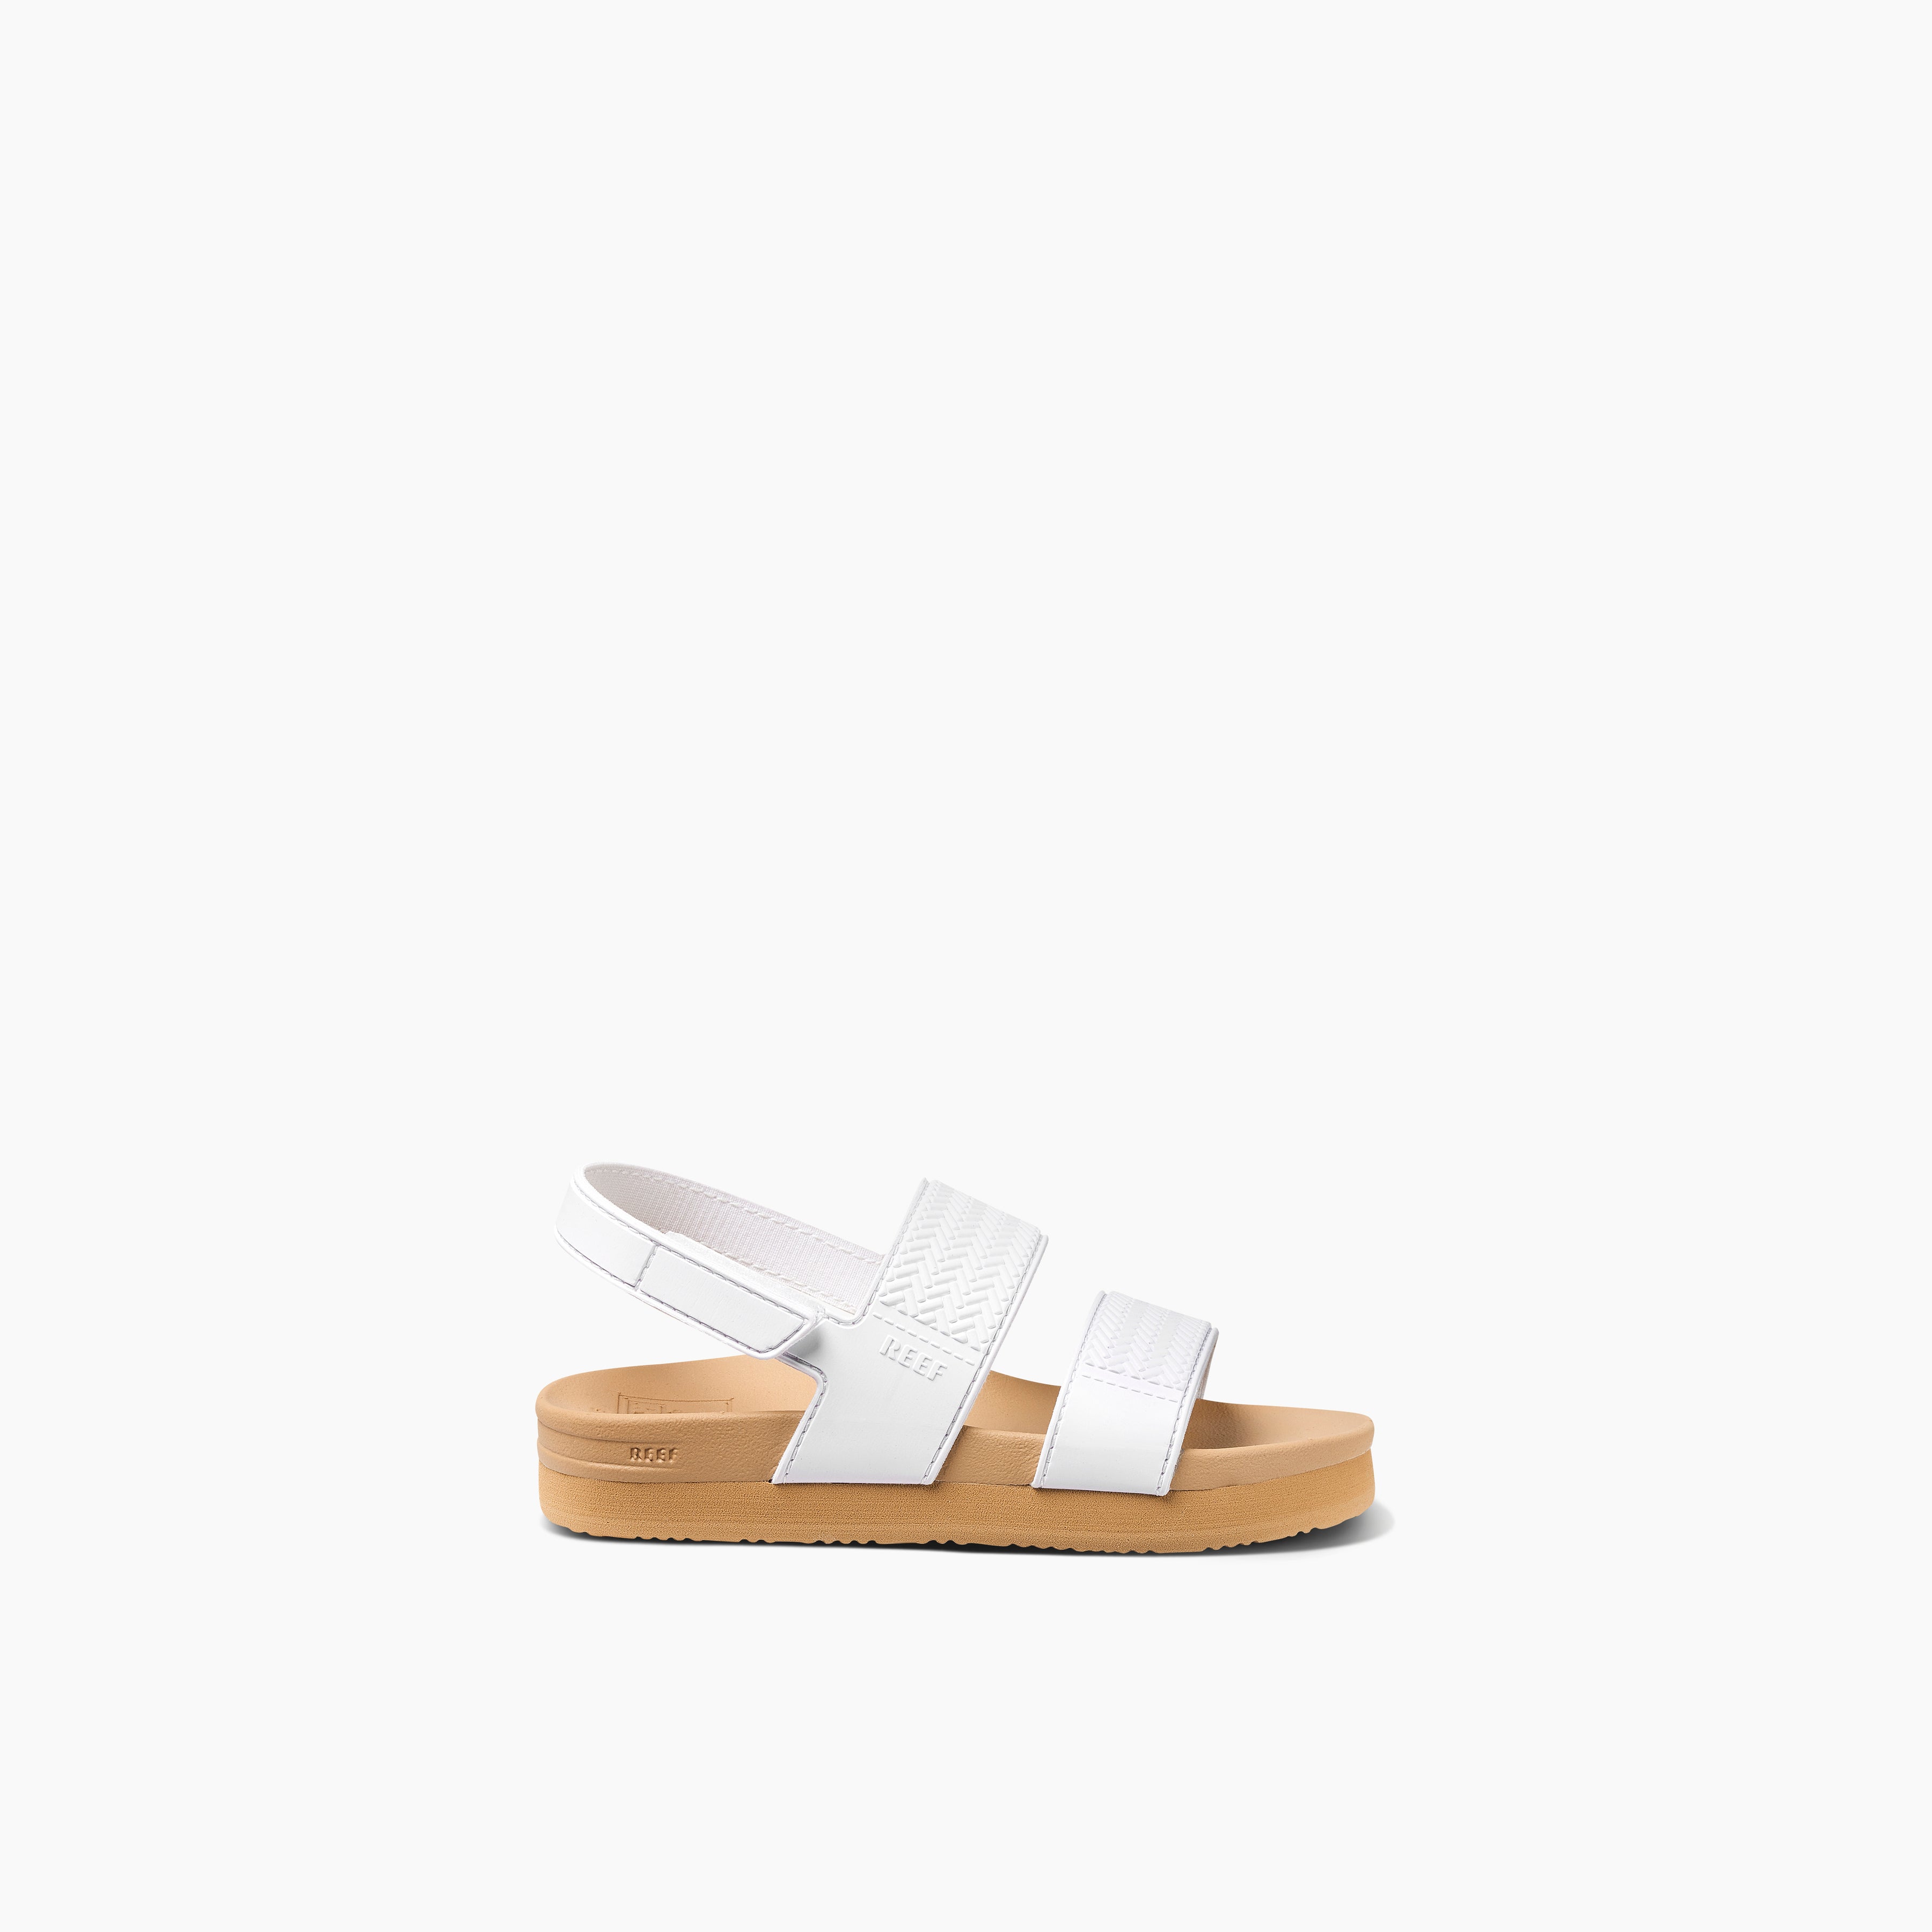 Toddler Girl's Water Vista Sandals in White/Tan side view